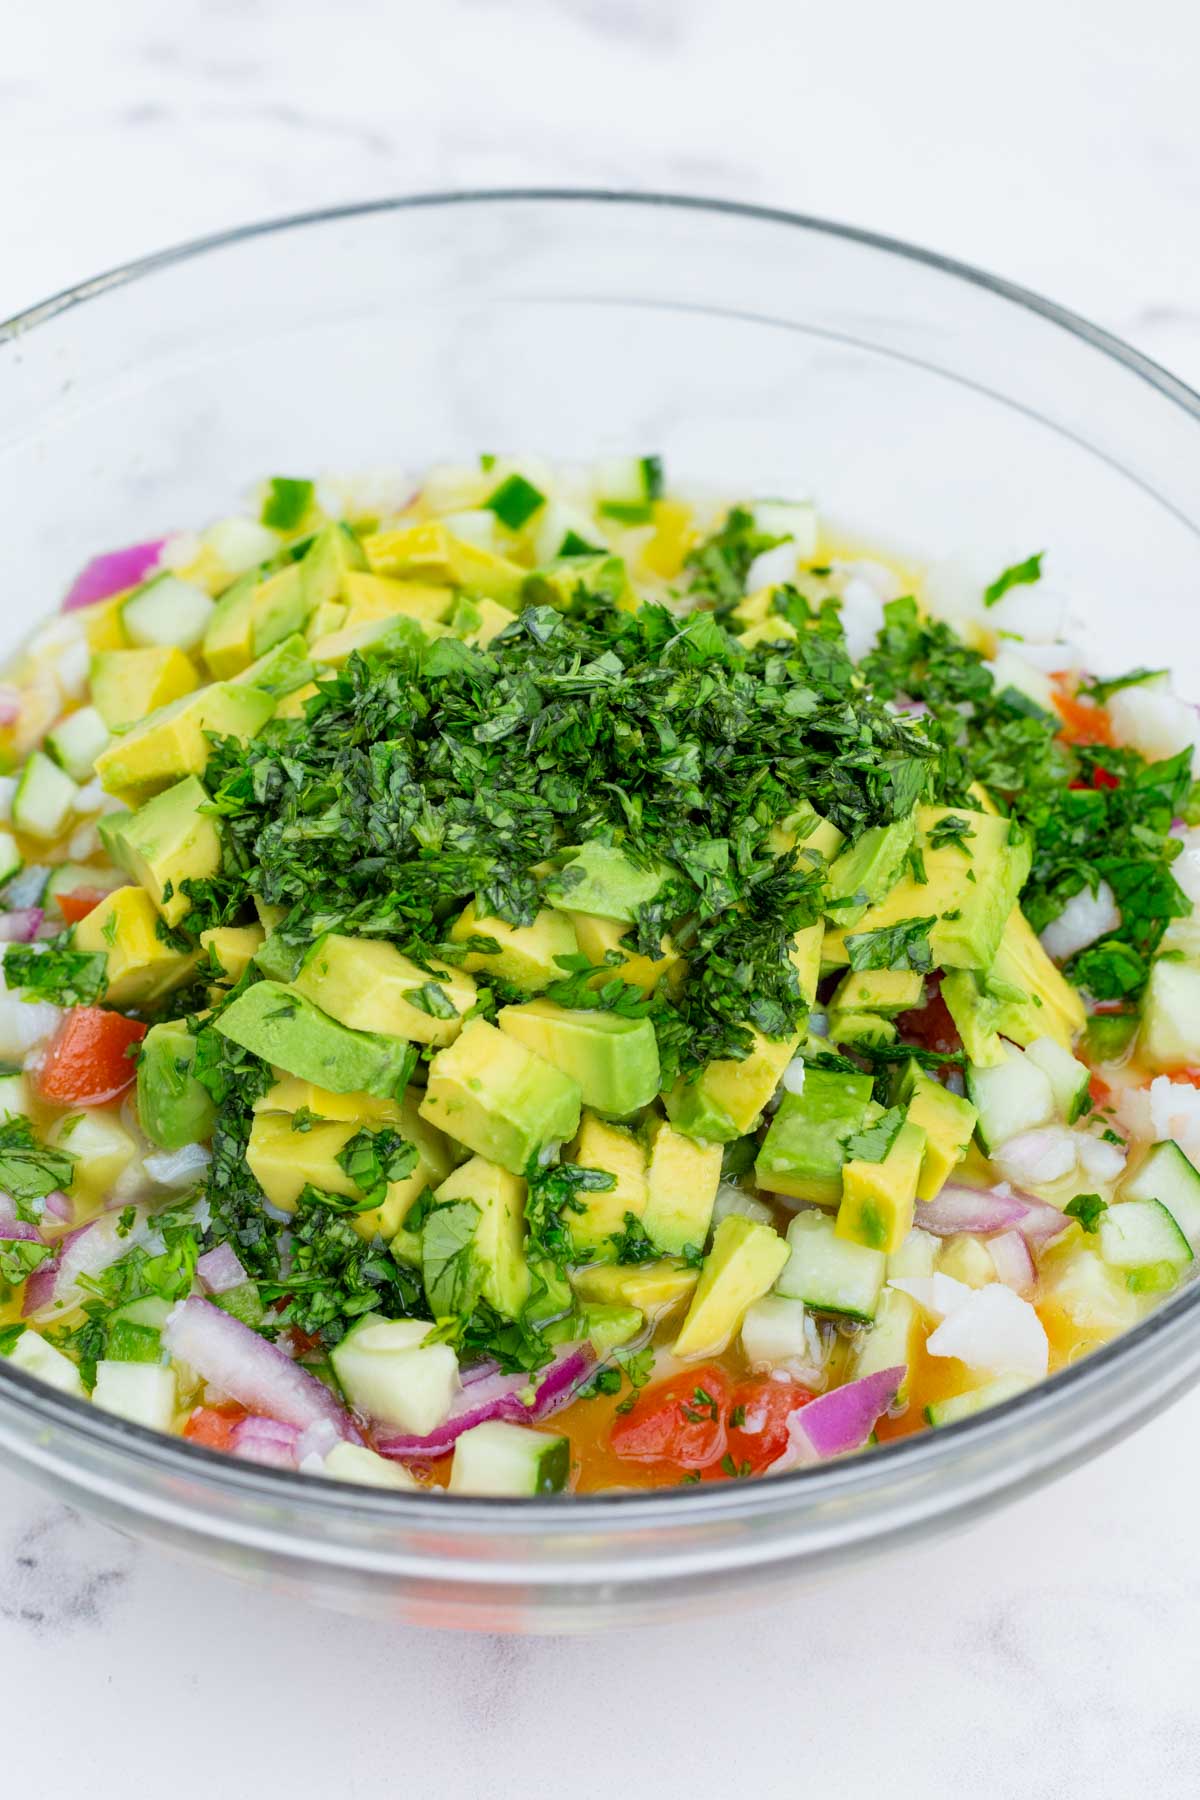 Avocado and cilantro are added just before serving.